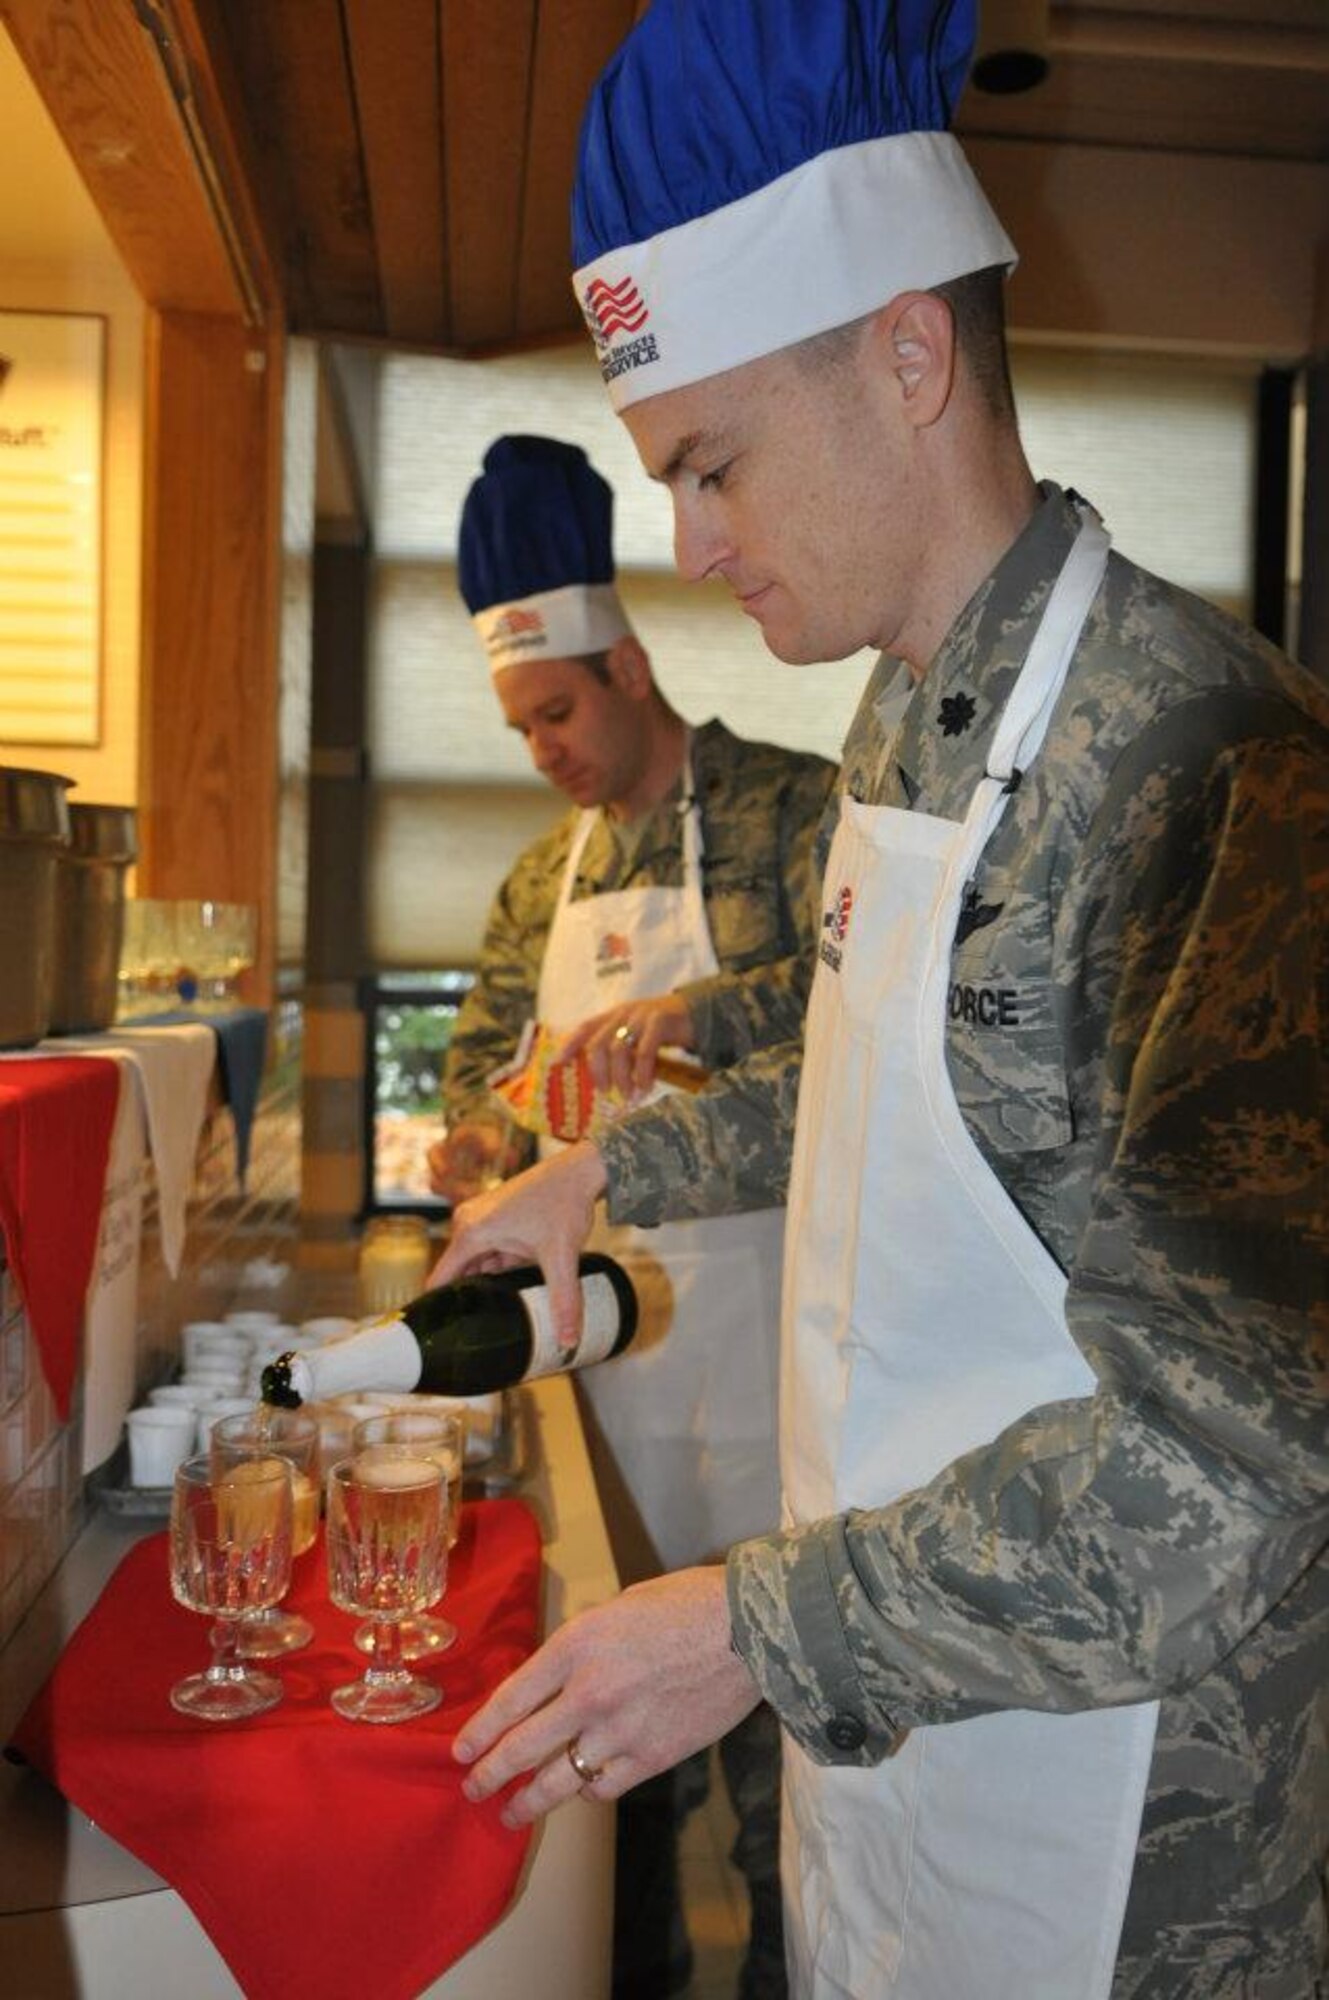 Lt. Col. Eric Carney, 7th Airlift Squadron commander, pours sparkling apple cider and egg nog Nov. 24, 2011, during the Thanksgiving Day meal at the Olympic Dining Facility, Joint Base Lewis-McChord, Wash. (U.S. Air Force photo/Tech. Sgt. Oshawn Jefferson)